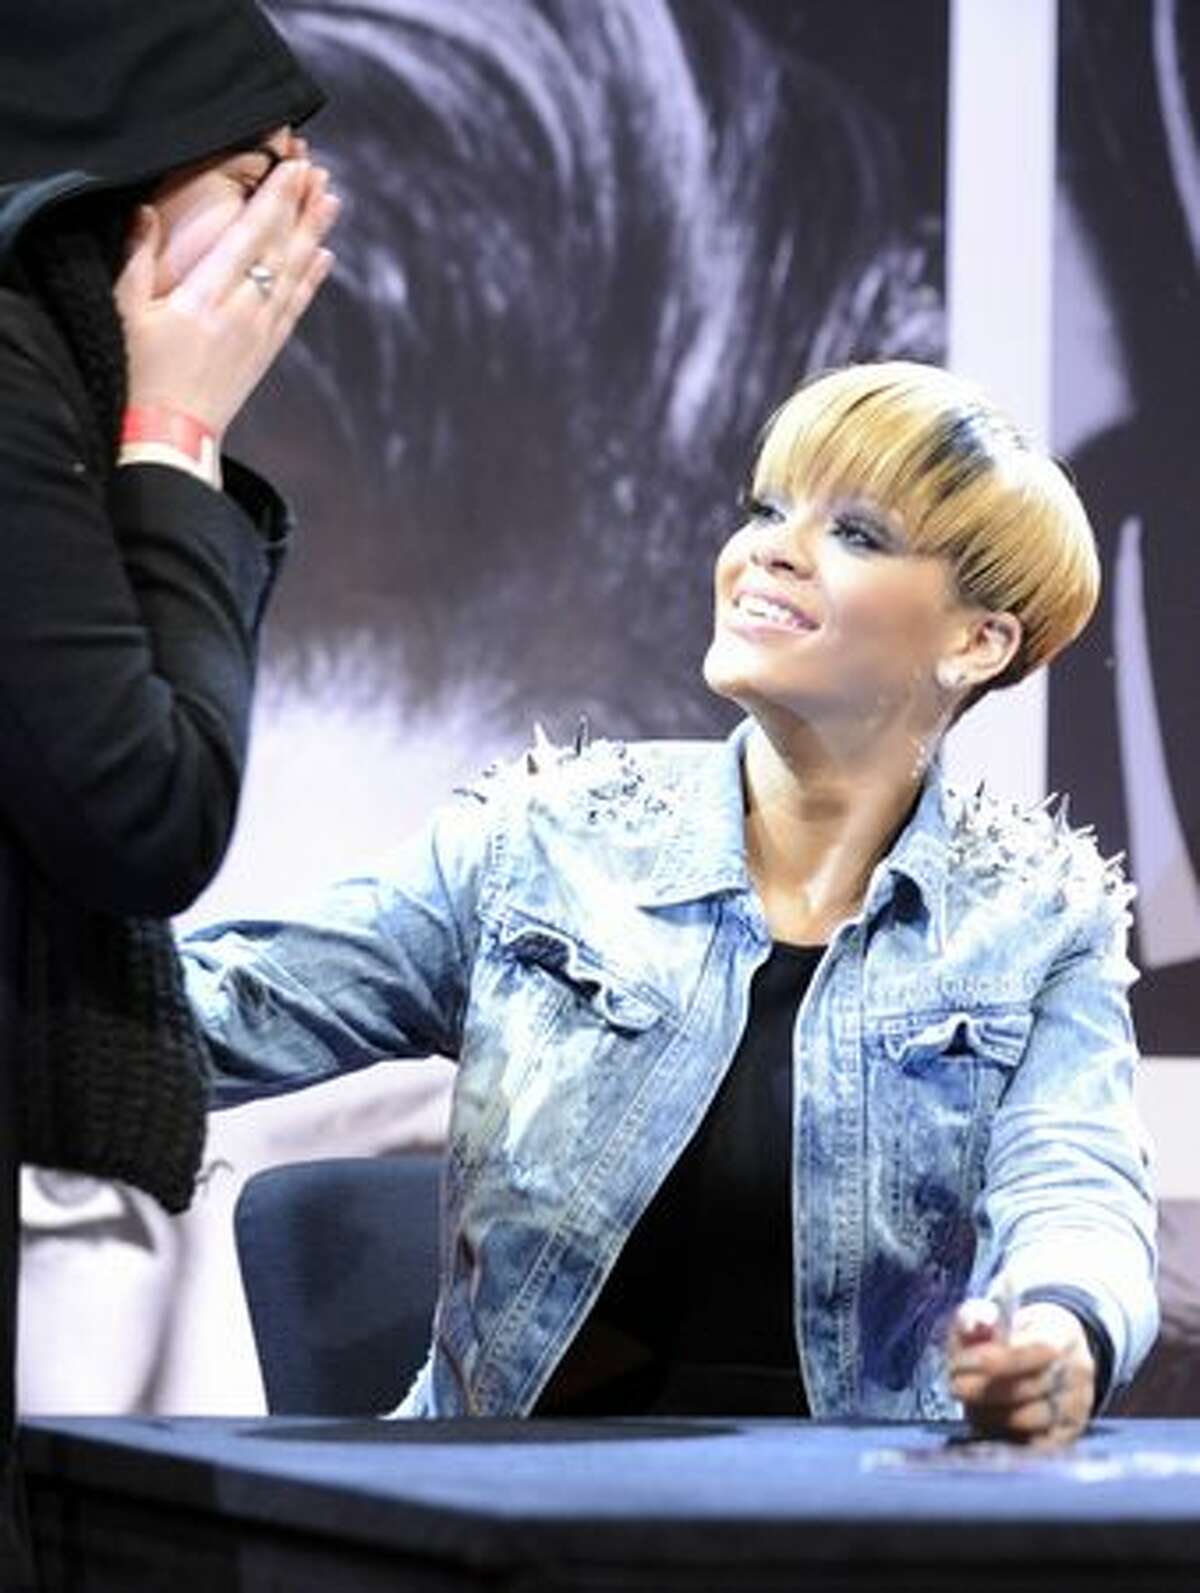 US singer Rihanna comforts a fan who cries as she receives an autograph at a shopping centre in Berlin.